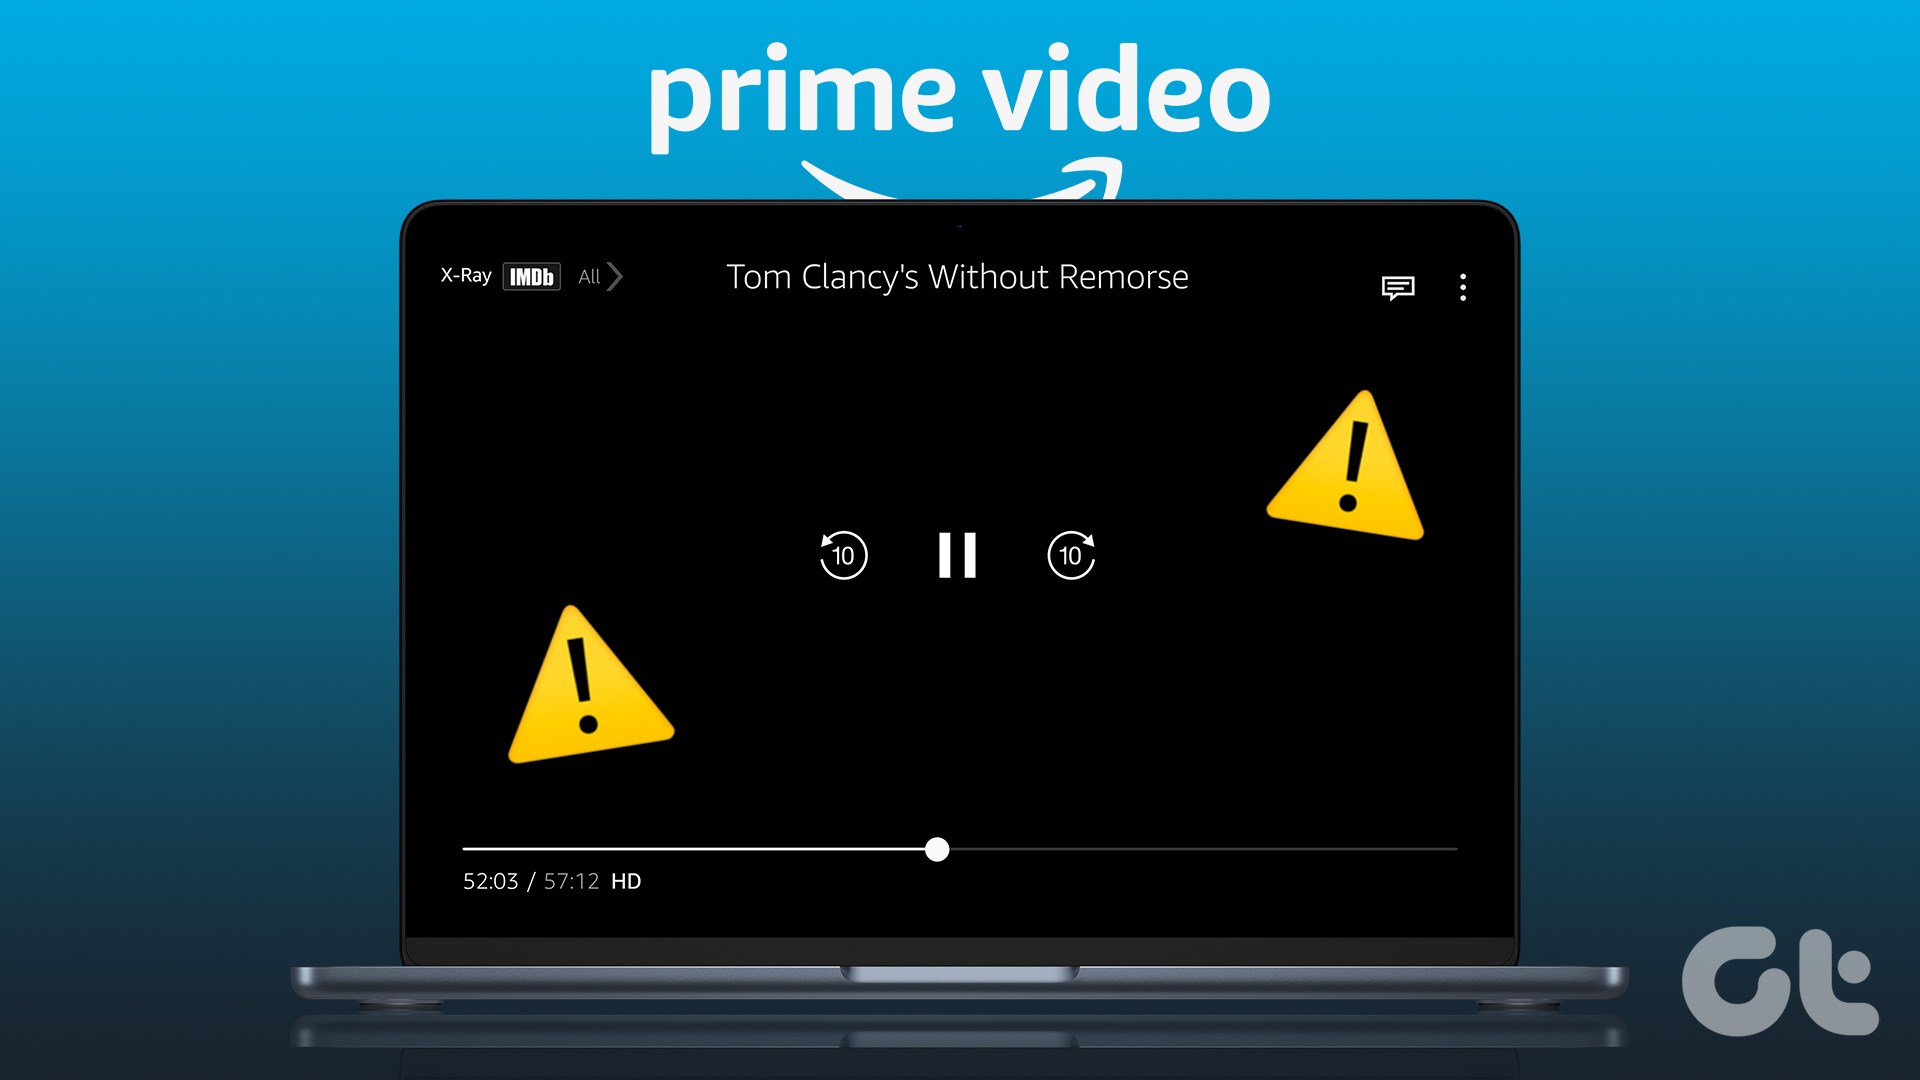 6 Best Fixes for Black Screen With Sound in Amazon Prime Video on Apple TV 4K - 86